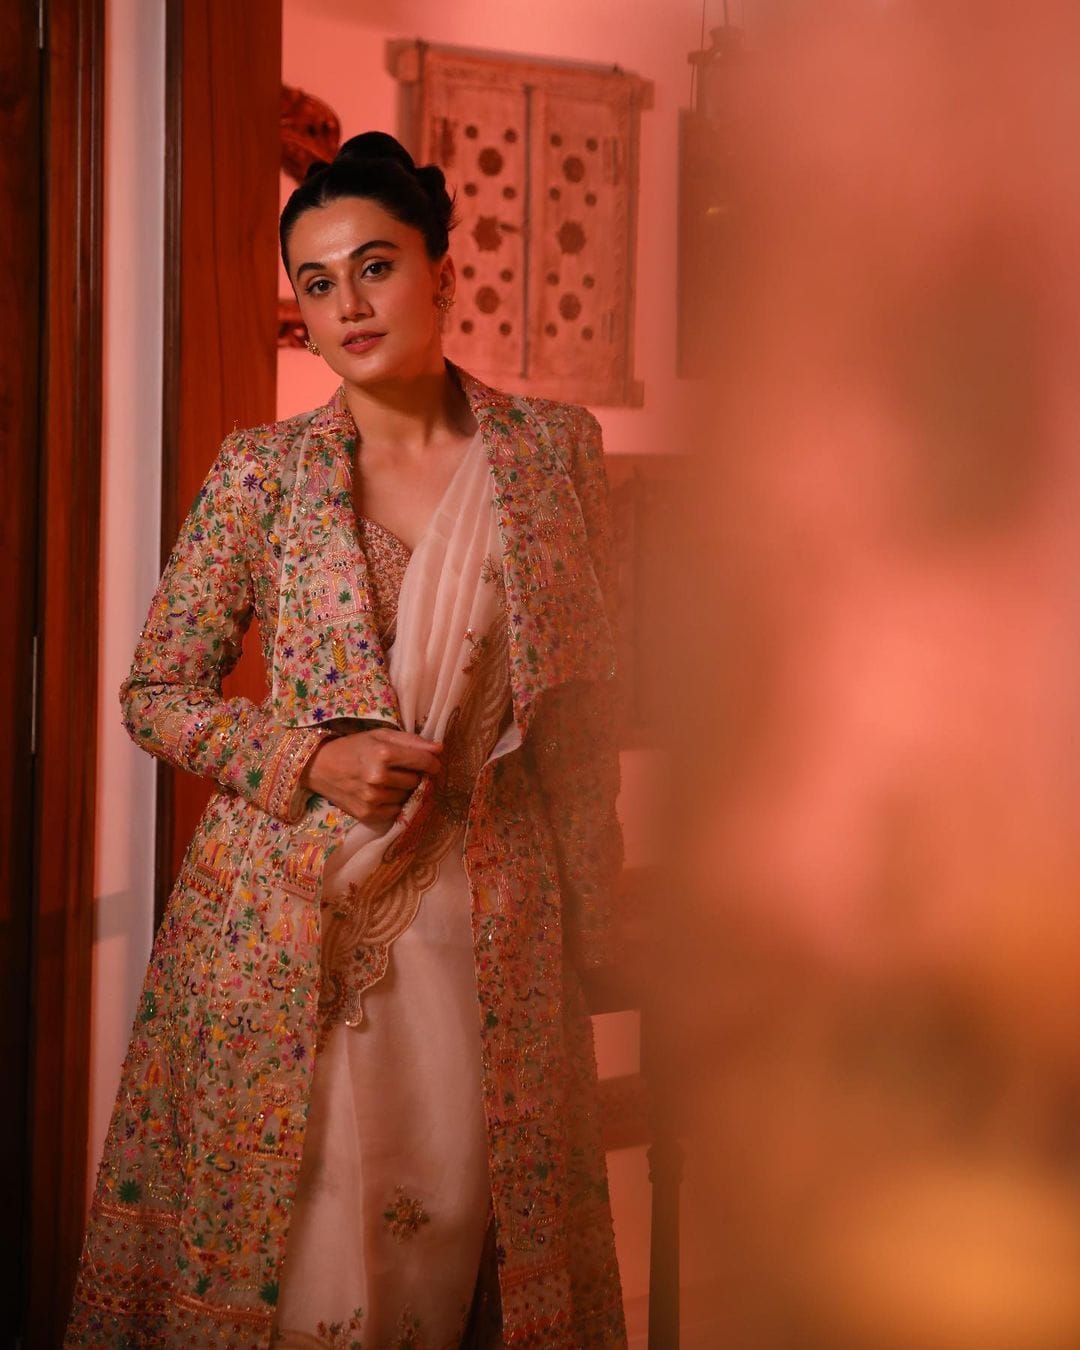 Taapsee Pannu cuts a striking figure in the tulle saree with the embellished jacket